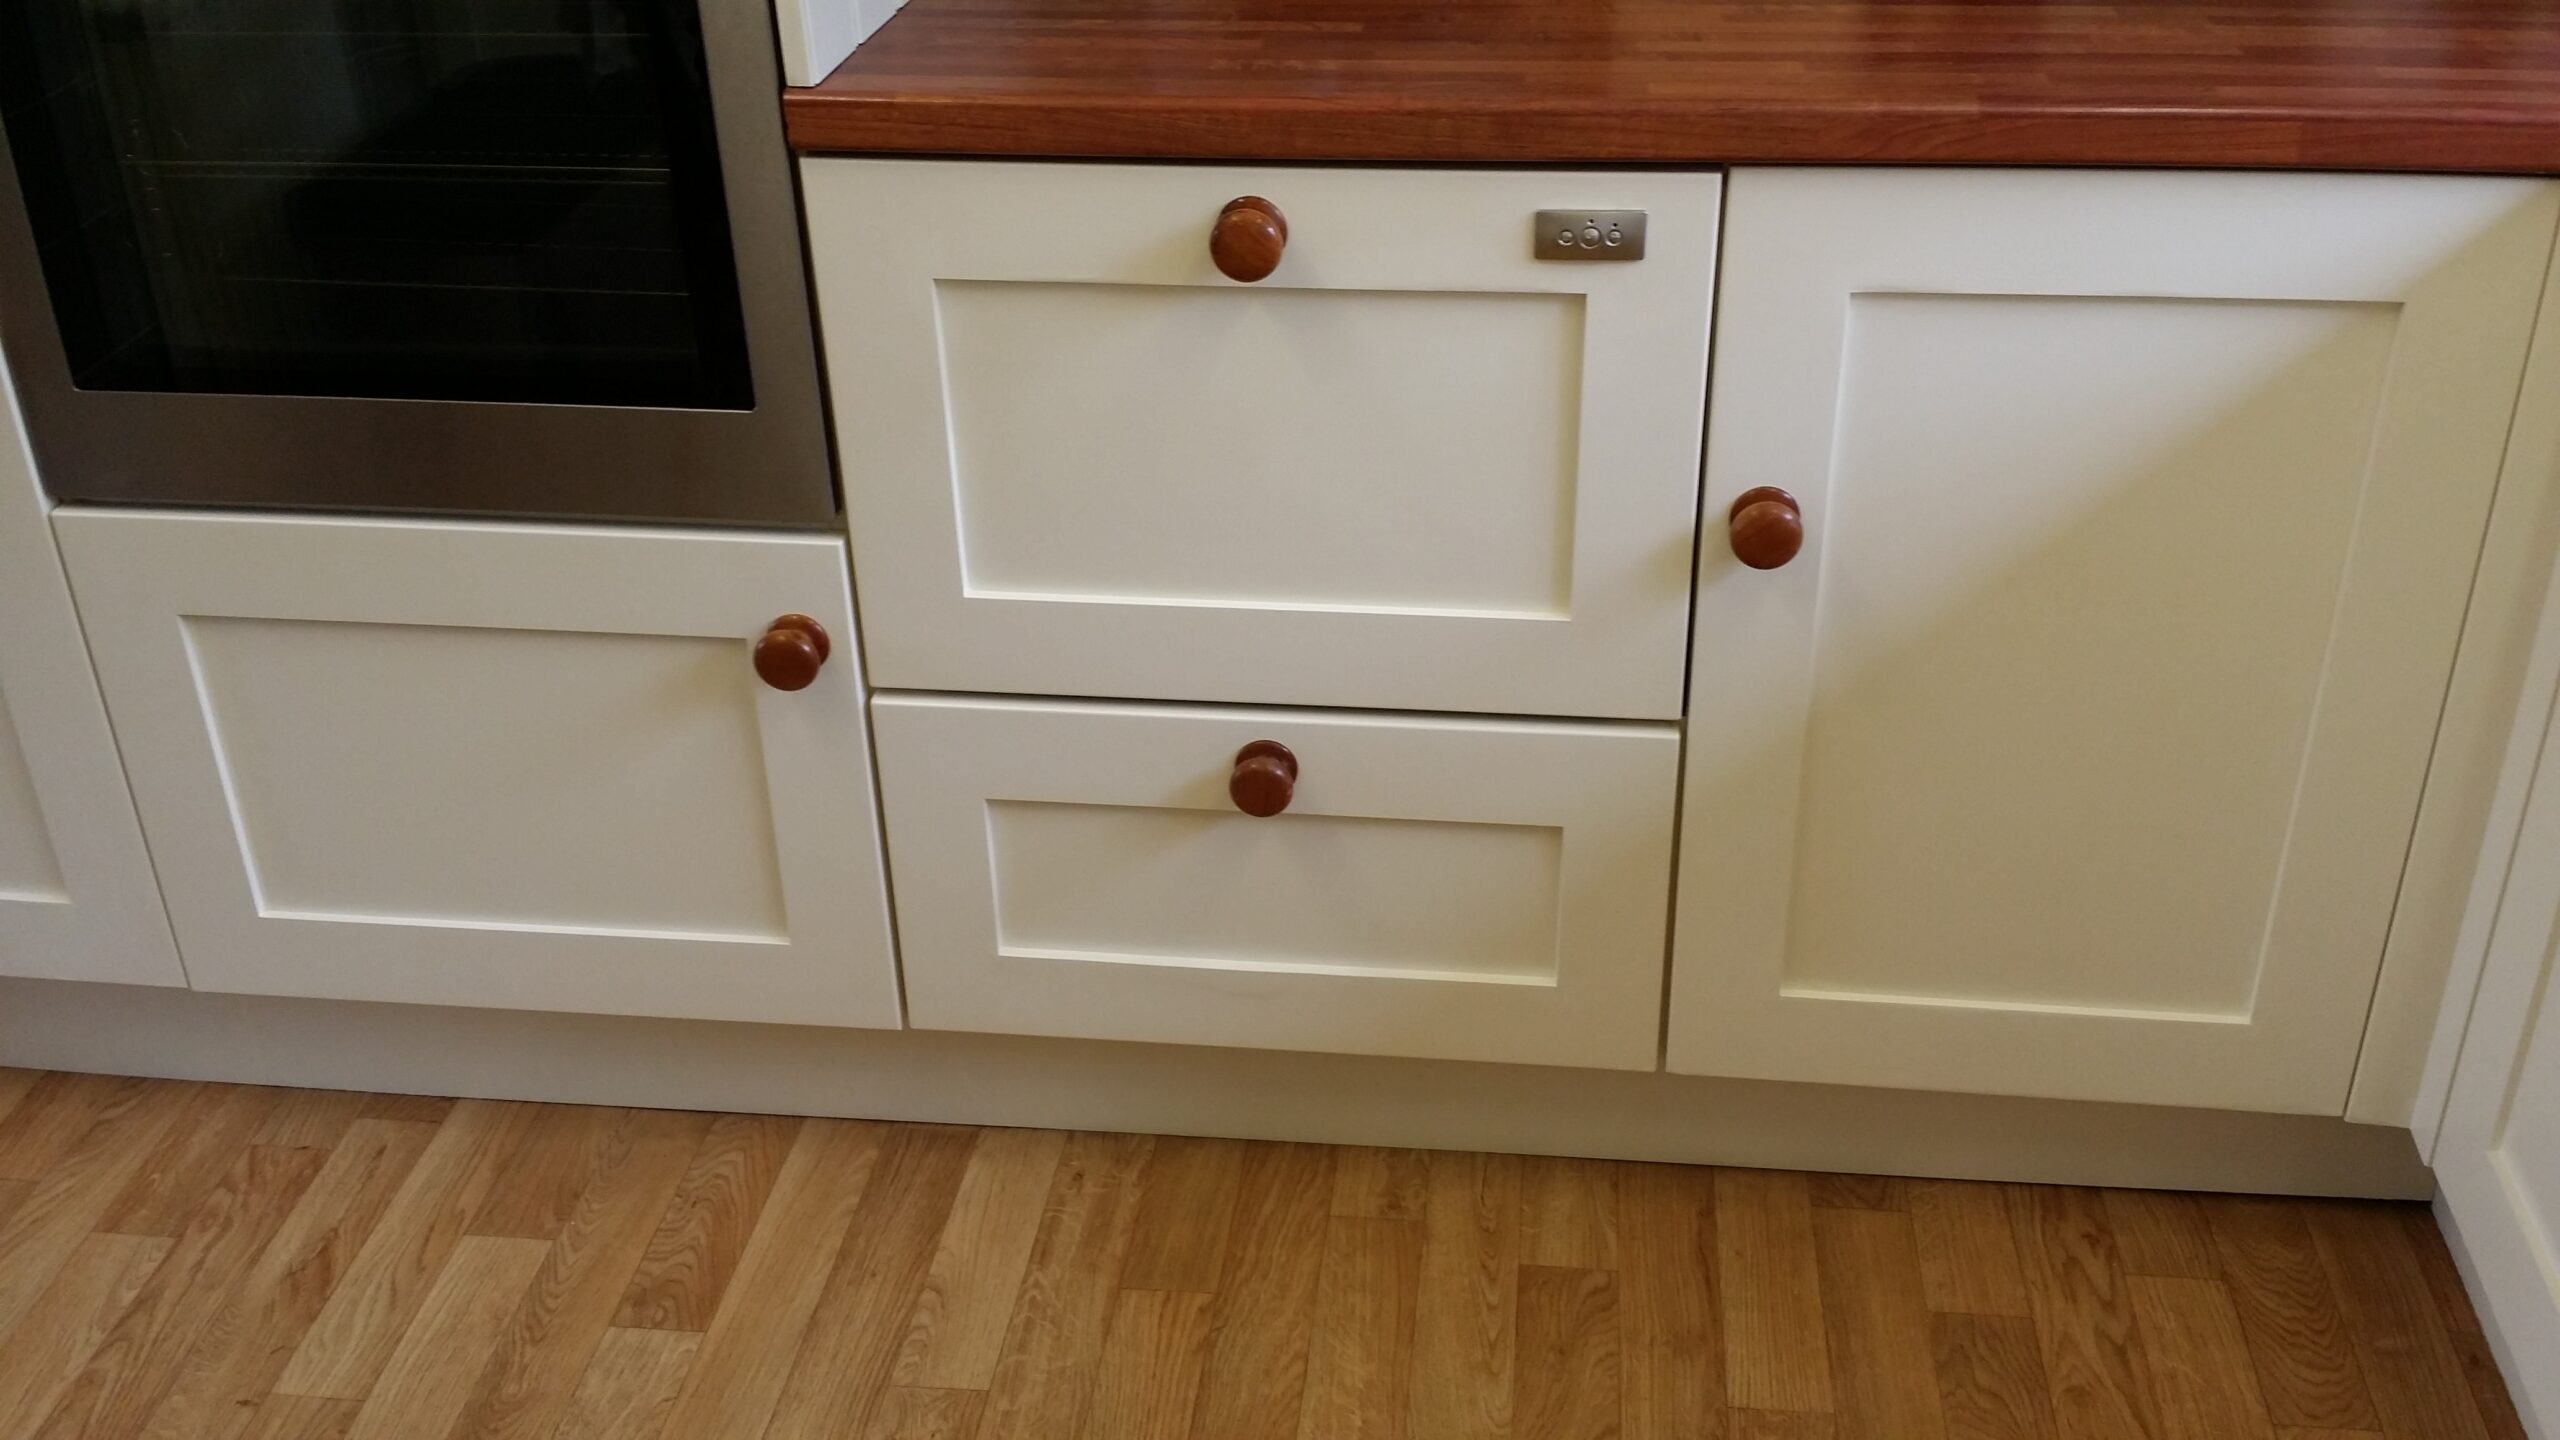 Farrow and Ball painted kitchen